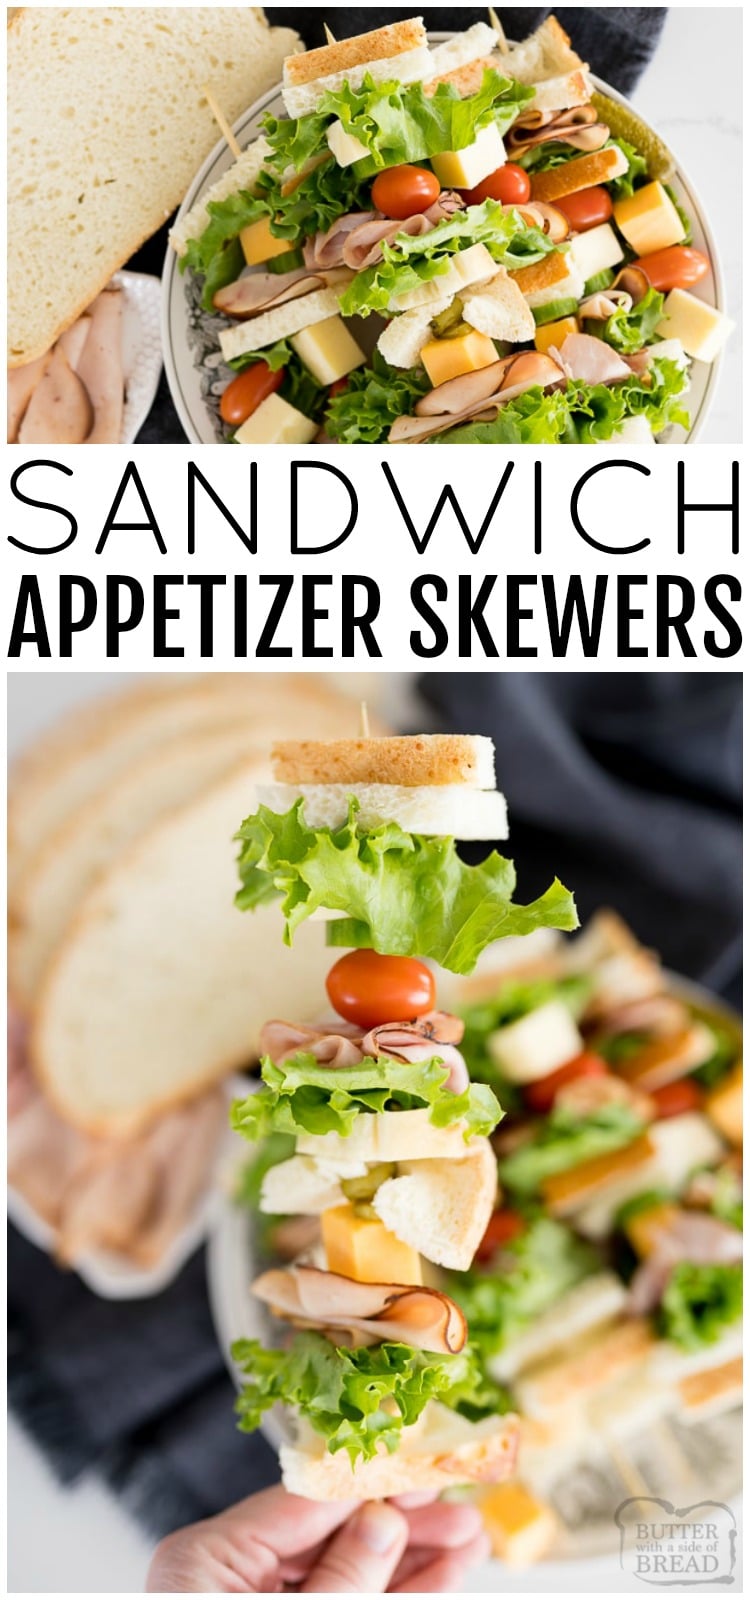 Appetizer Skewers are such a fun and easy way to serve various types of foods. Putting your sandwich onto a skewer, you are able to pack a little bit of everything you like all onto the stick. Bread, lettuce, deli meat, cheese, veggies, you name it! #sandwich #appetizer #easyrecipe #sandwiches #kabobs from BUTTER WITH A SIDE OF BREAD